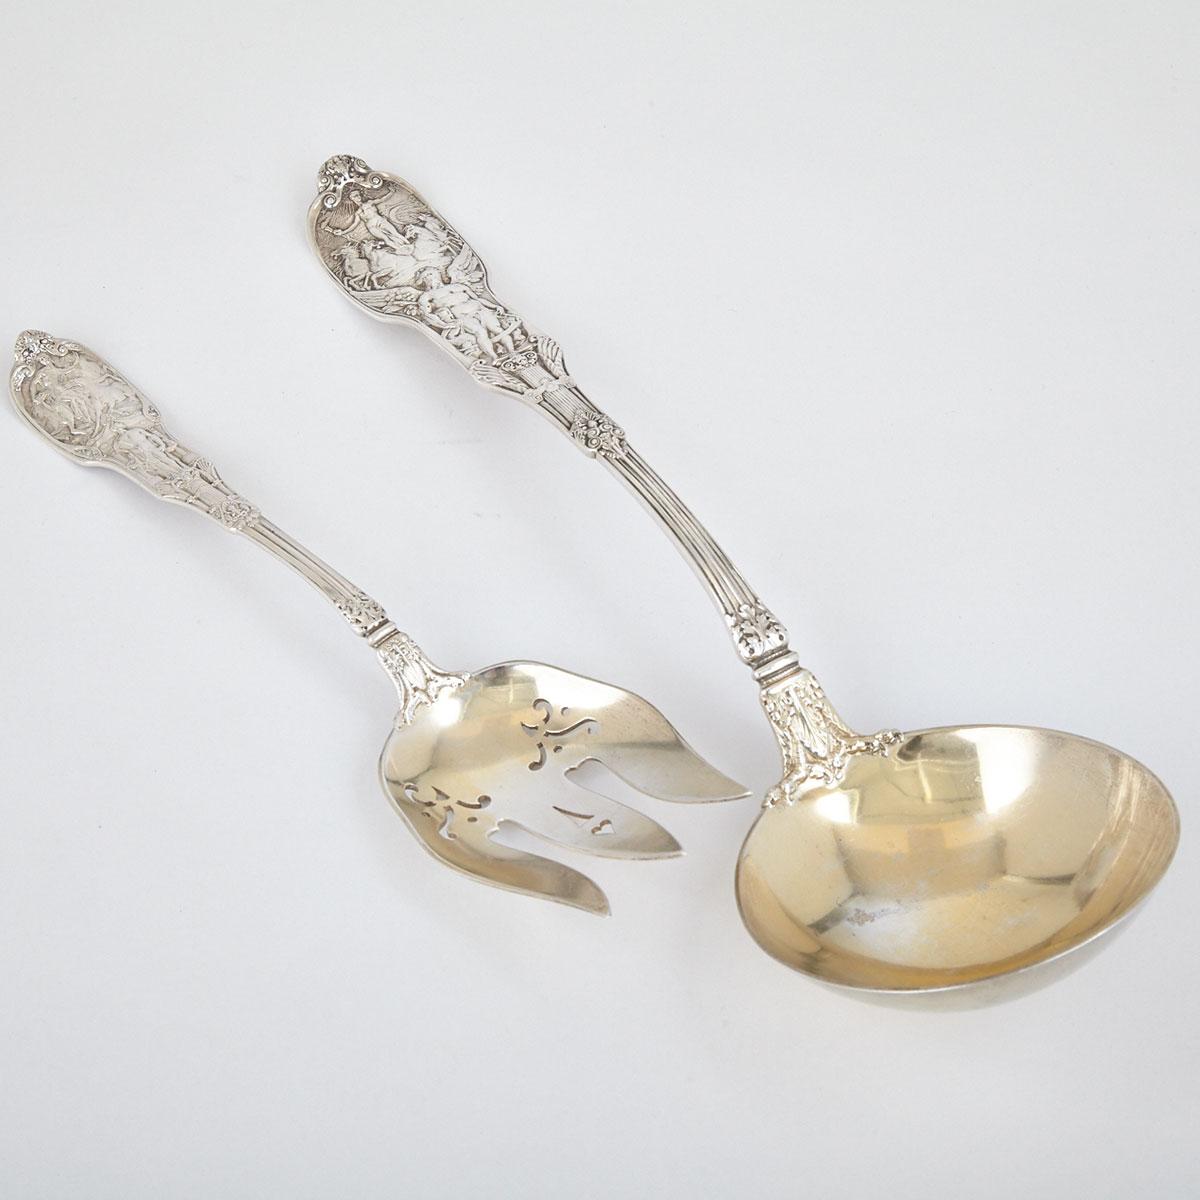 American Silver ‘Mythologique’ Pattern Soup Ladle and Serving Fork, Gorham Mfg. Co., Providence, R.I., late 19th century